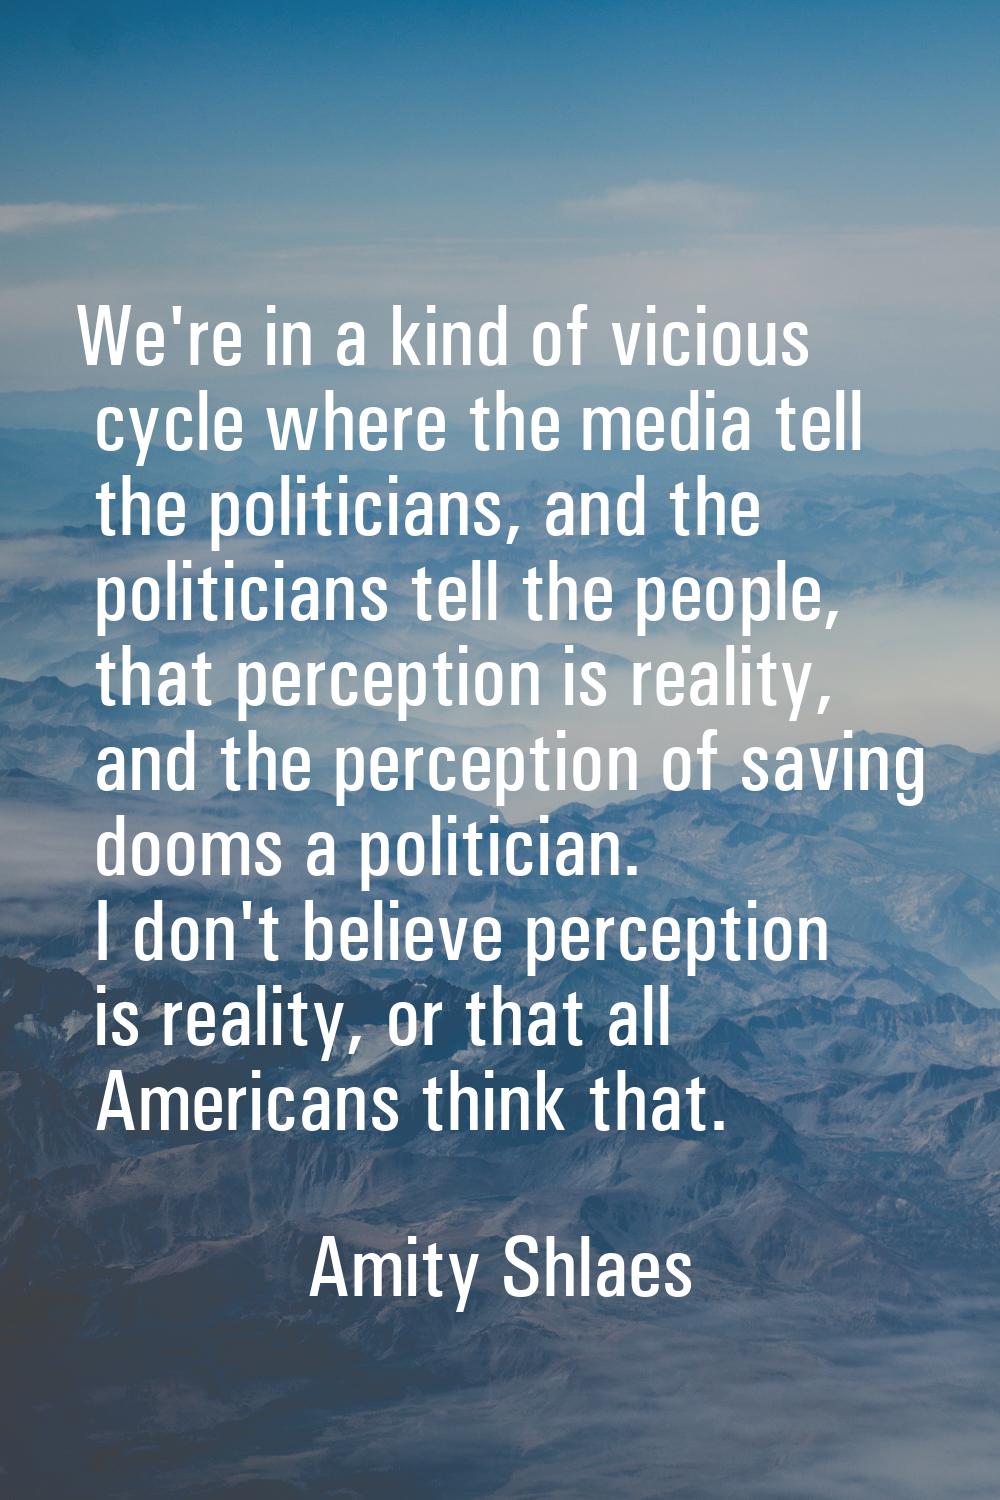 We're in a kind of vicious cycle where the media tell the politicians, and the politicians tell the